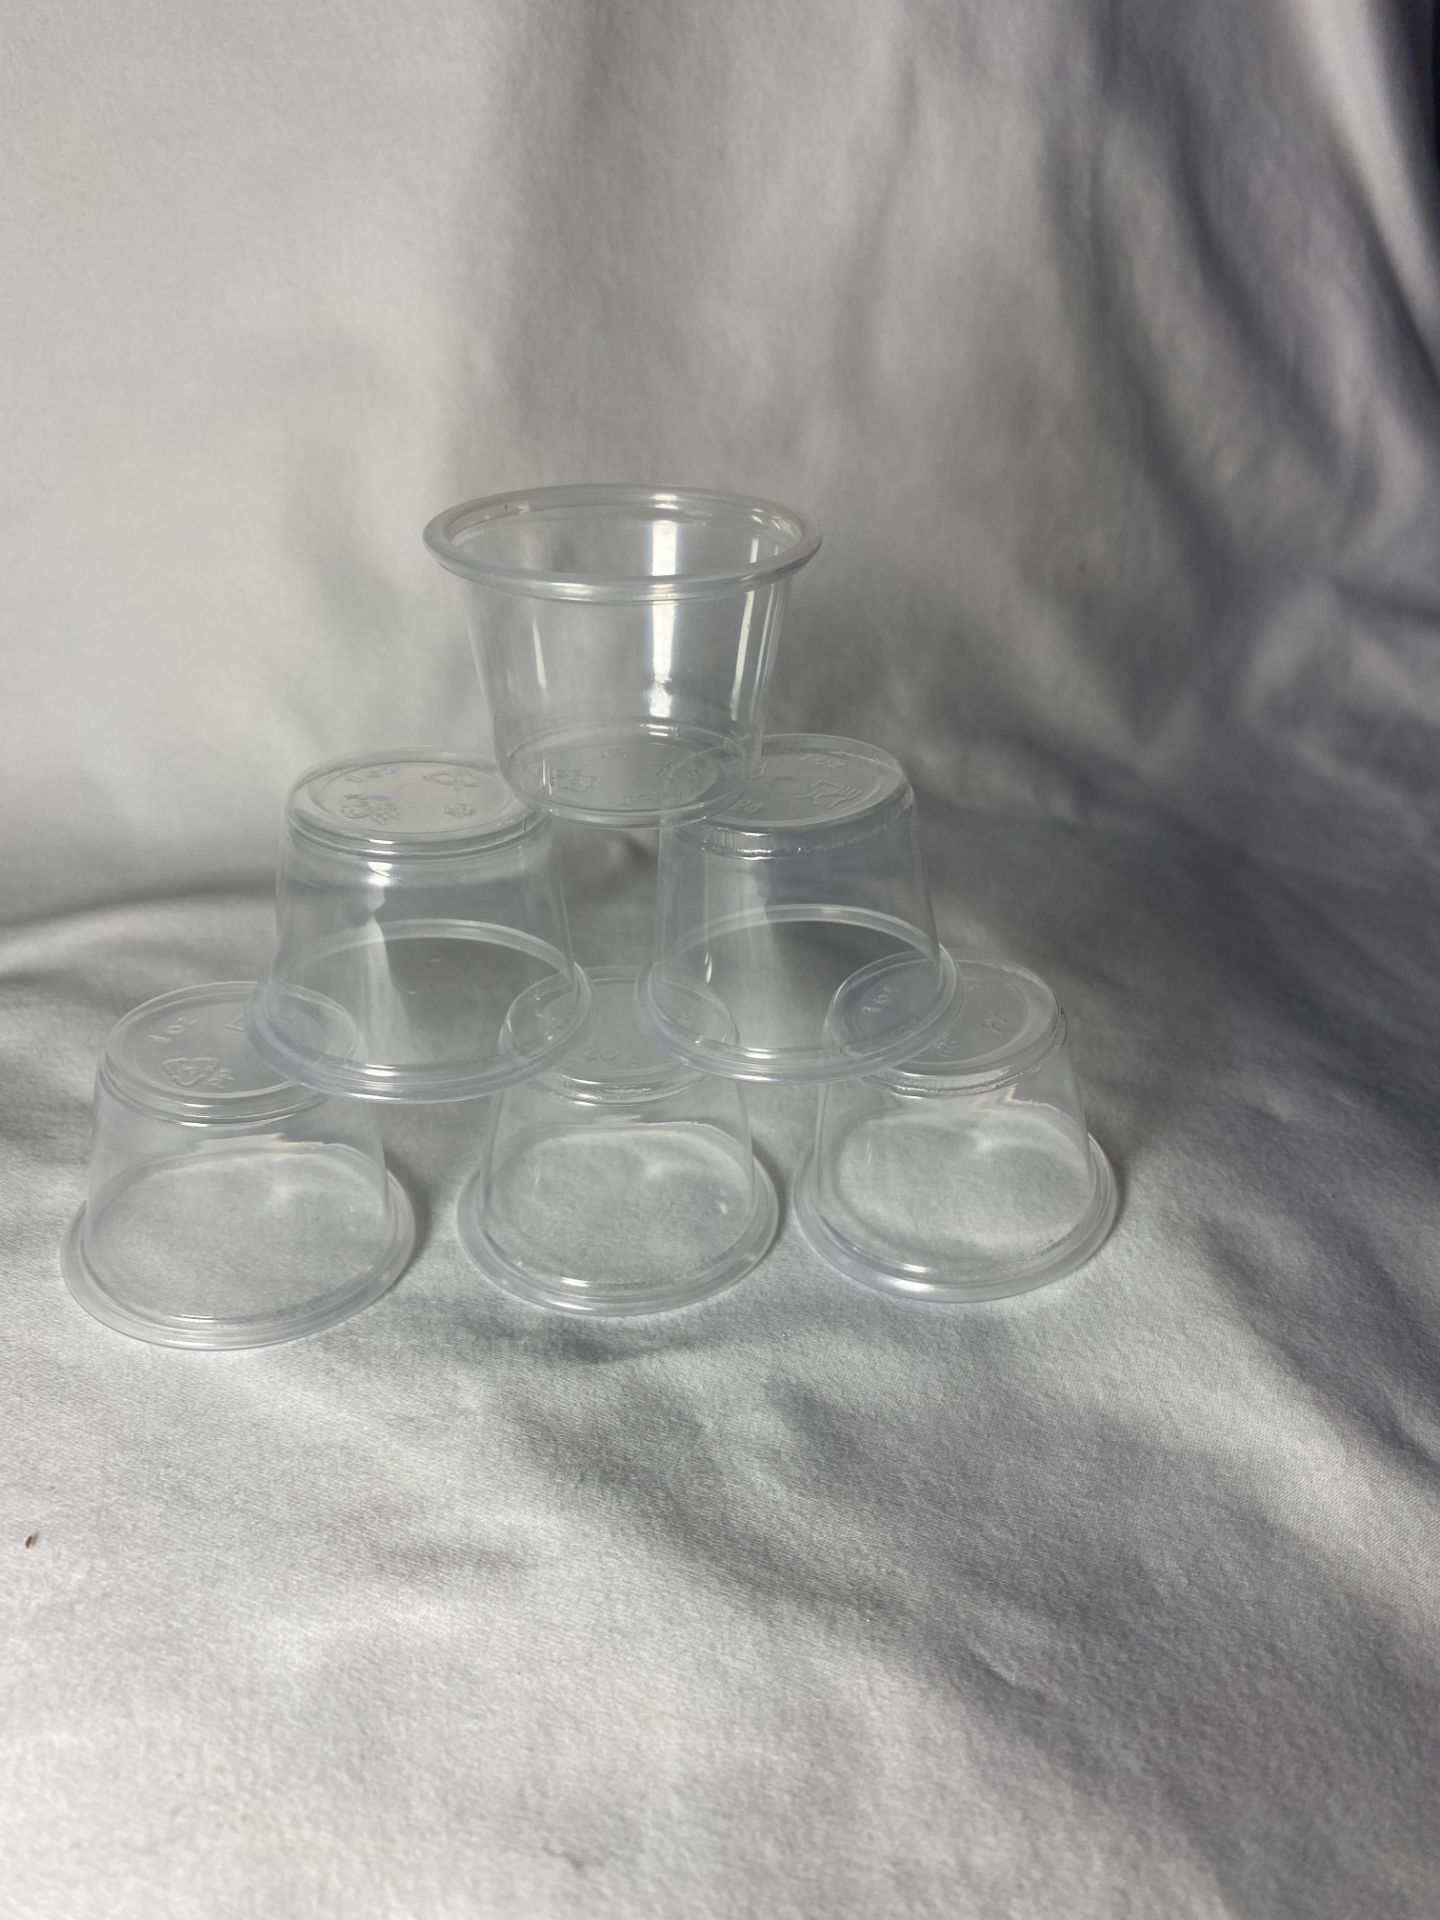 1 x Box of Portion Cups & 1 Box of Lids by Value Choice - Image 3 of 4